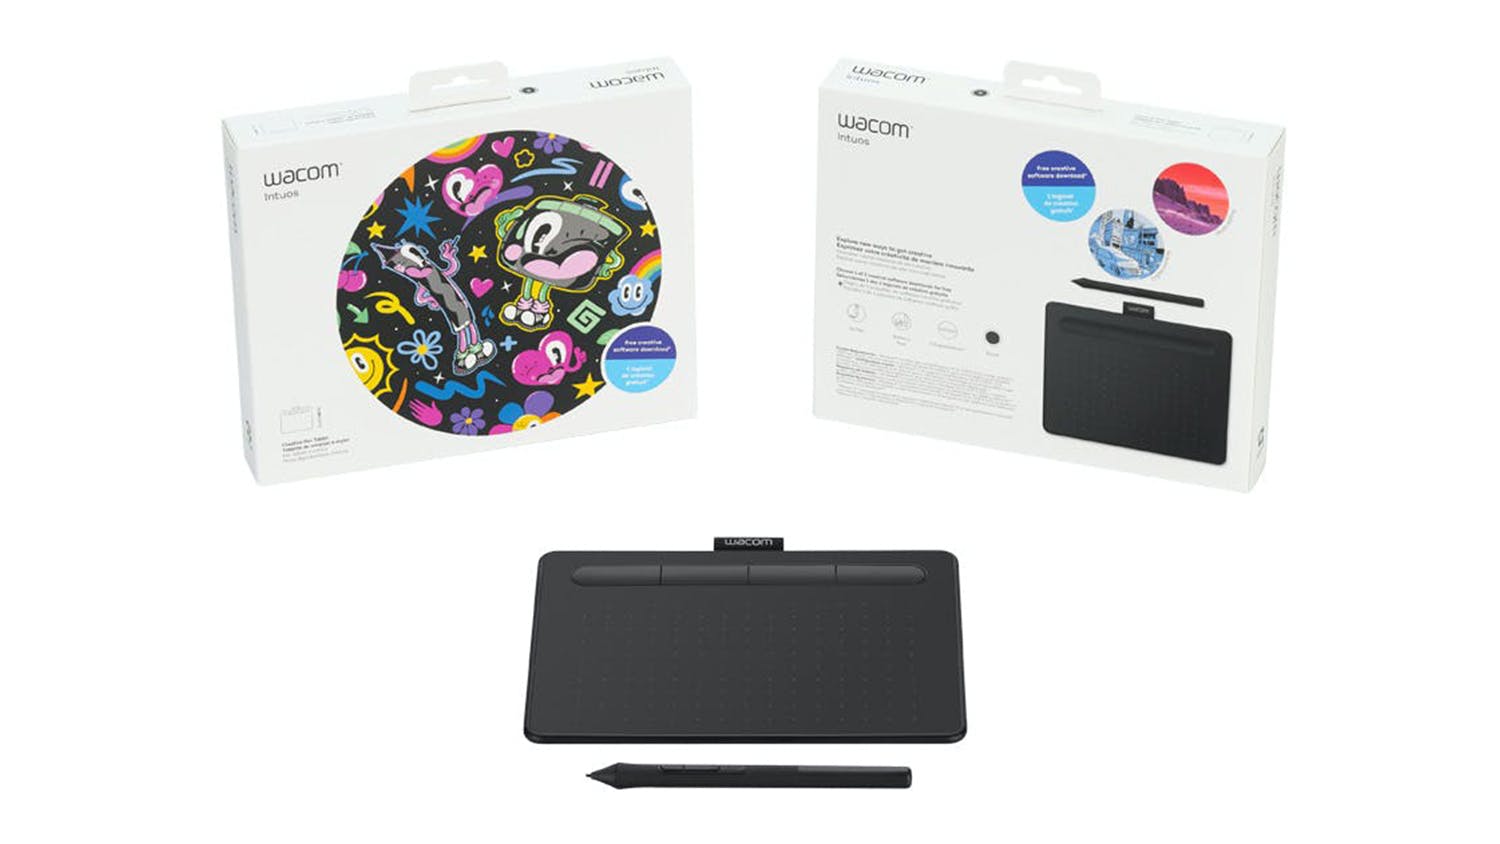 Wacom Intuos Creative Pen Tablet Without Bluetooth - Small